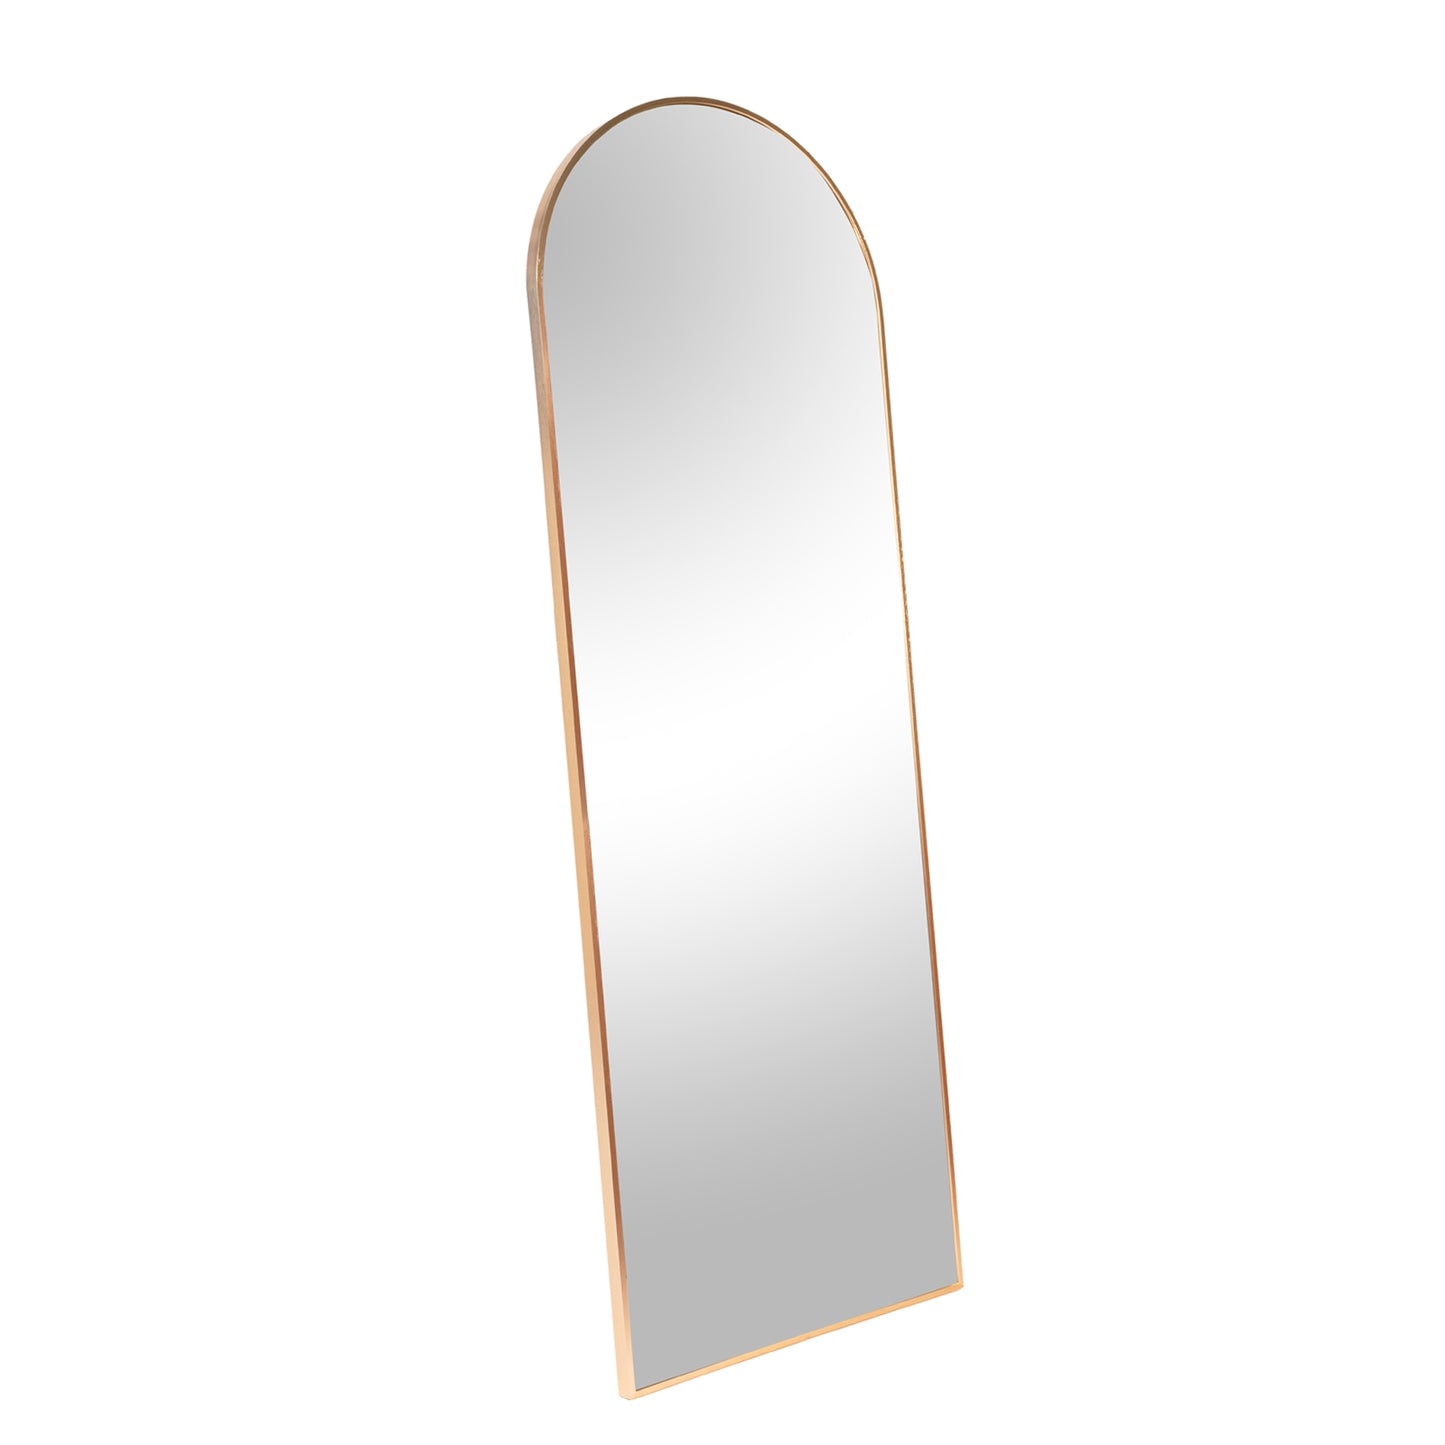 Full Length Wall Mirror - 63” x 20” Arched Free Standing Body Mirror , Black Metal Framed Large Floor Mirror for Bedroom, Modern  Stand Up / Leaning Mirror